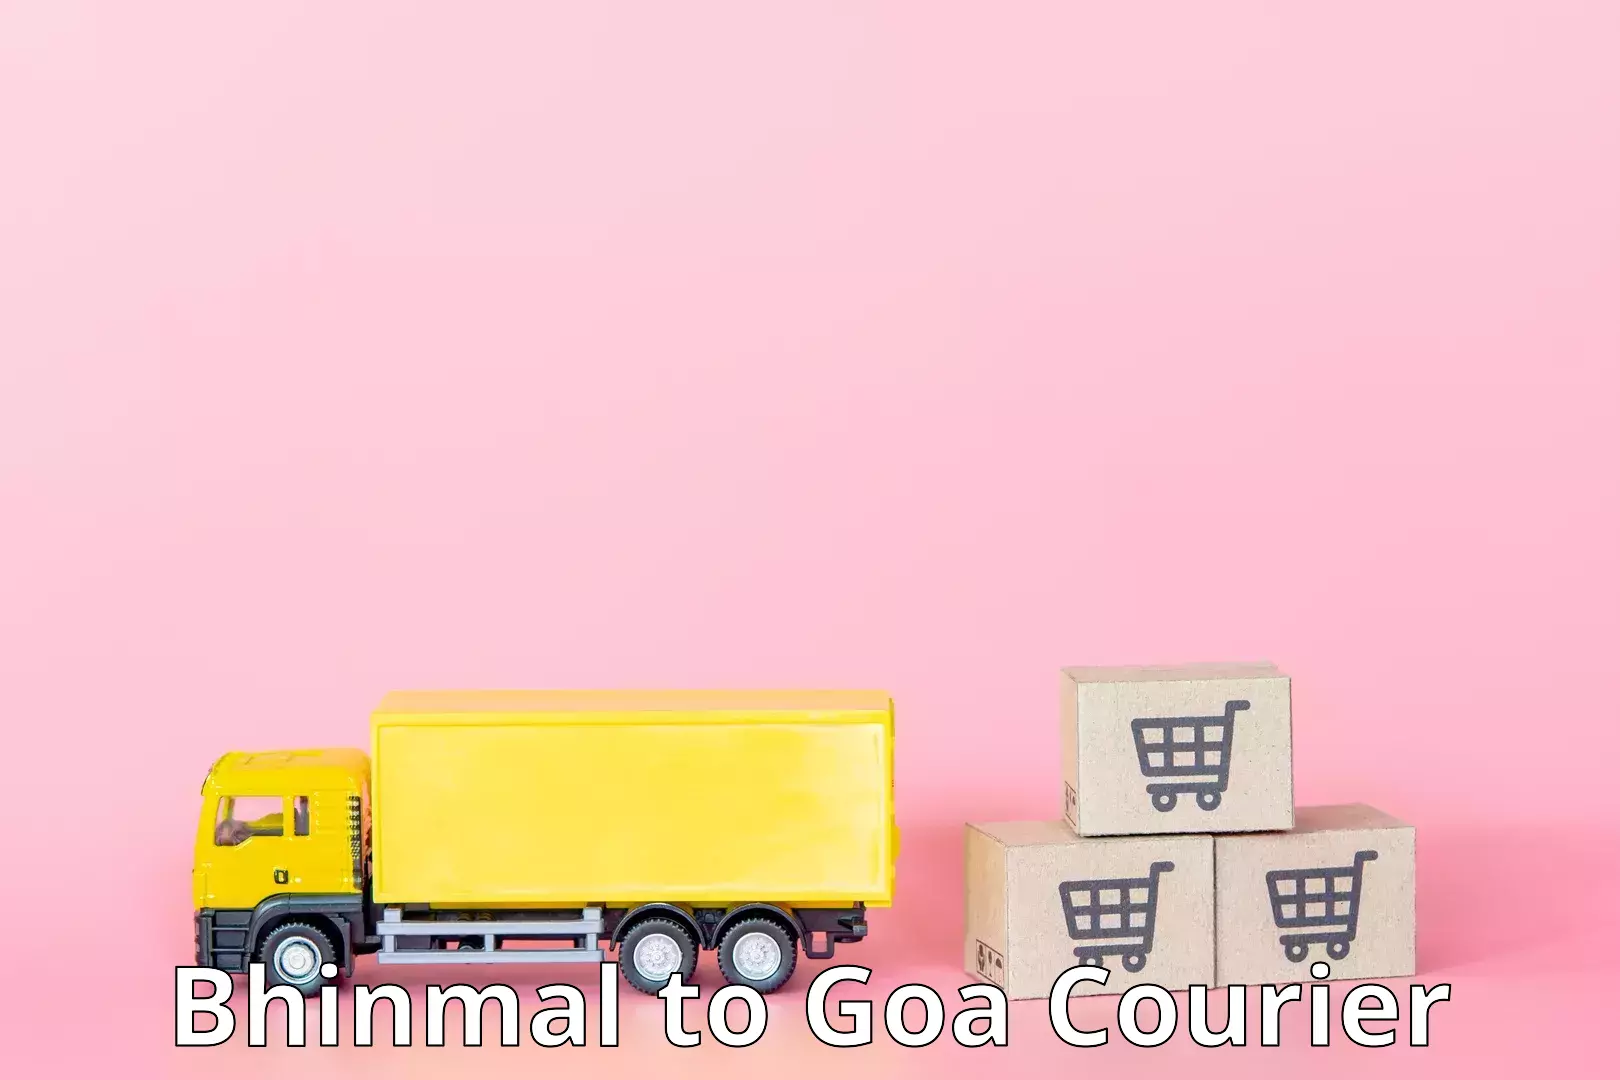 Comprehensive delivery network Bhinmal to Goa